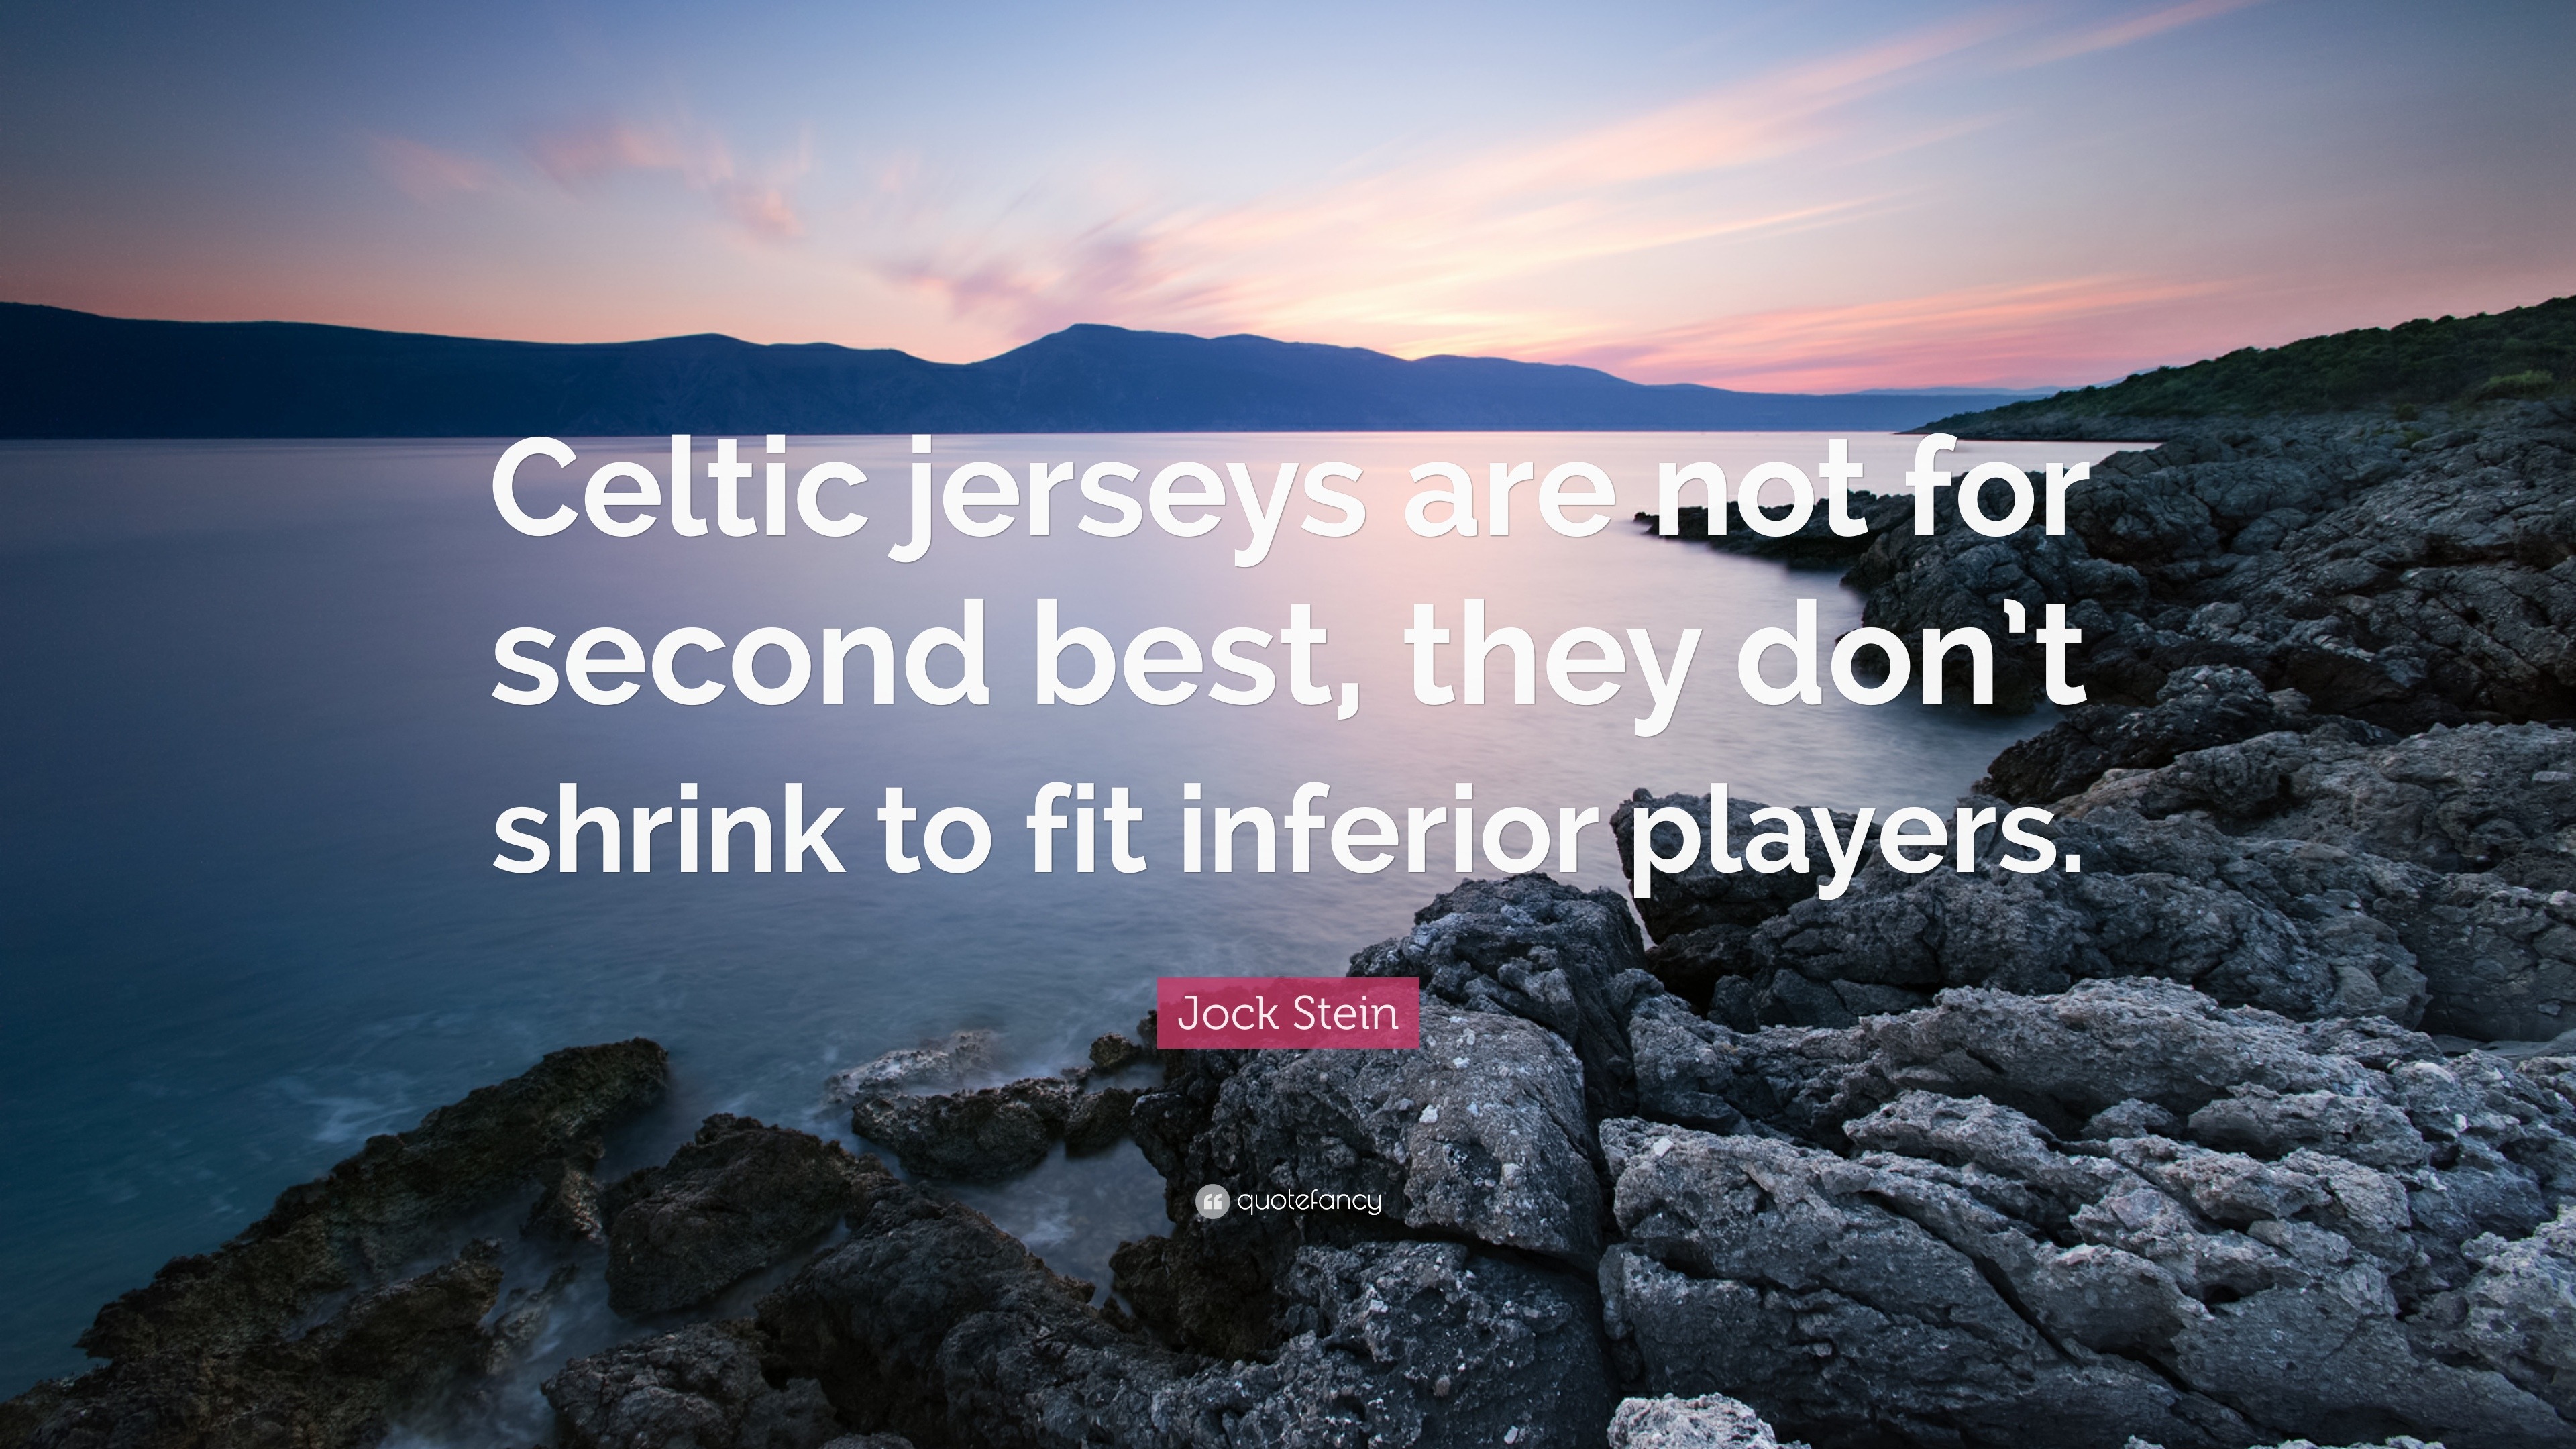 The Jersey Doesn't Shrink, a Celtic Football Club community